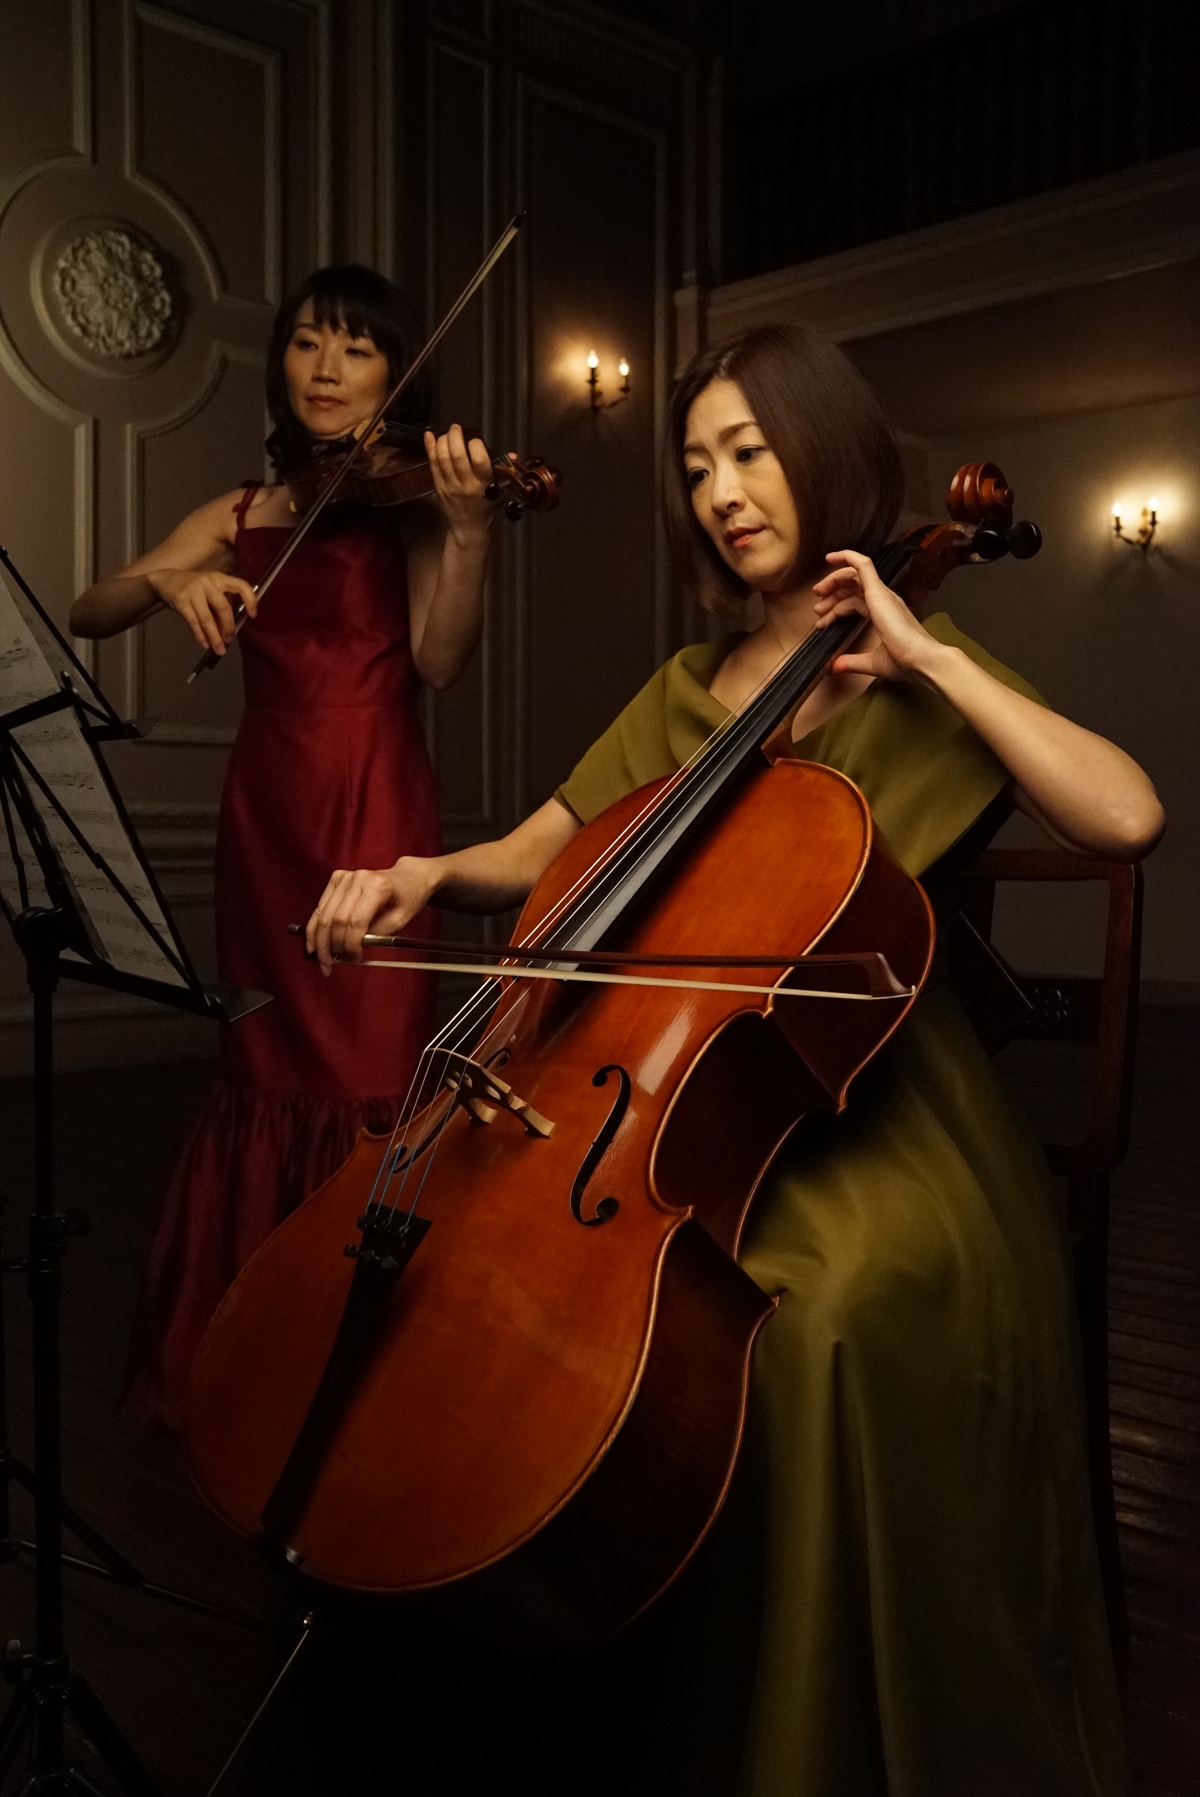 Female cello and violin players performing in low light